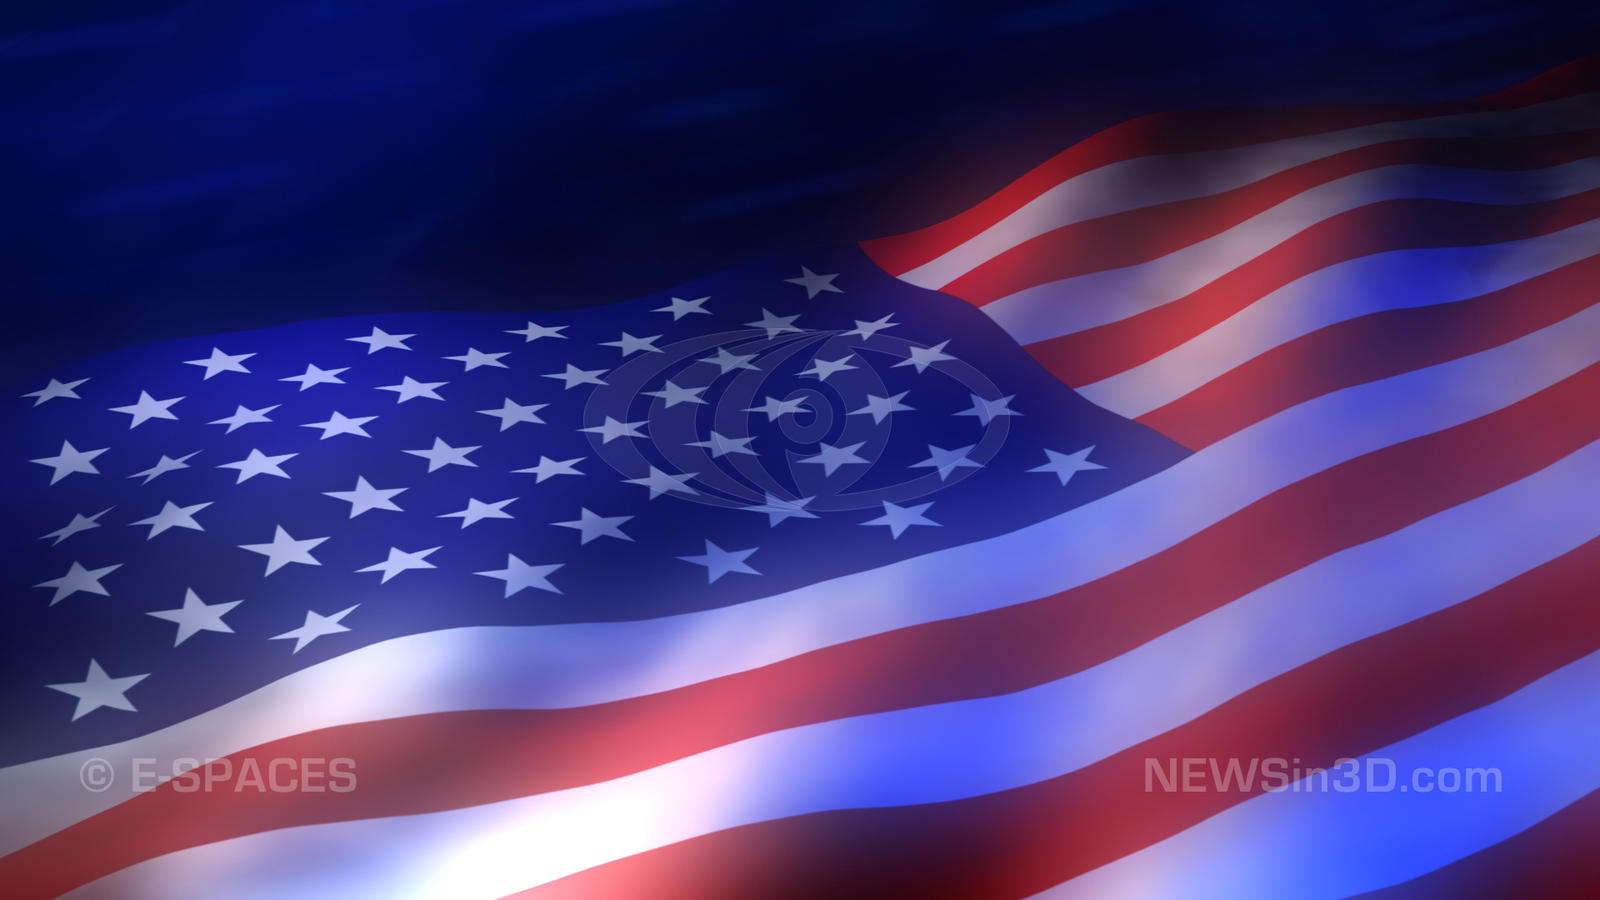 American+flag+background+images